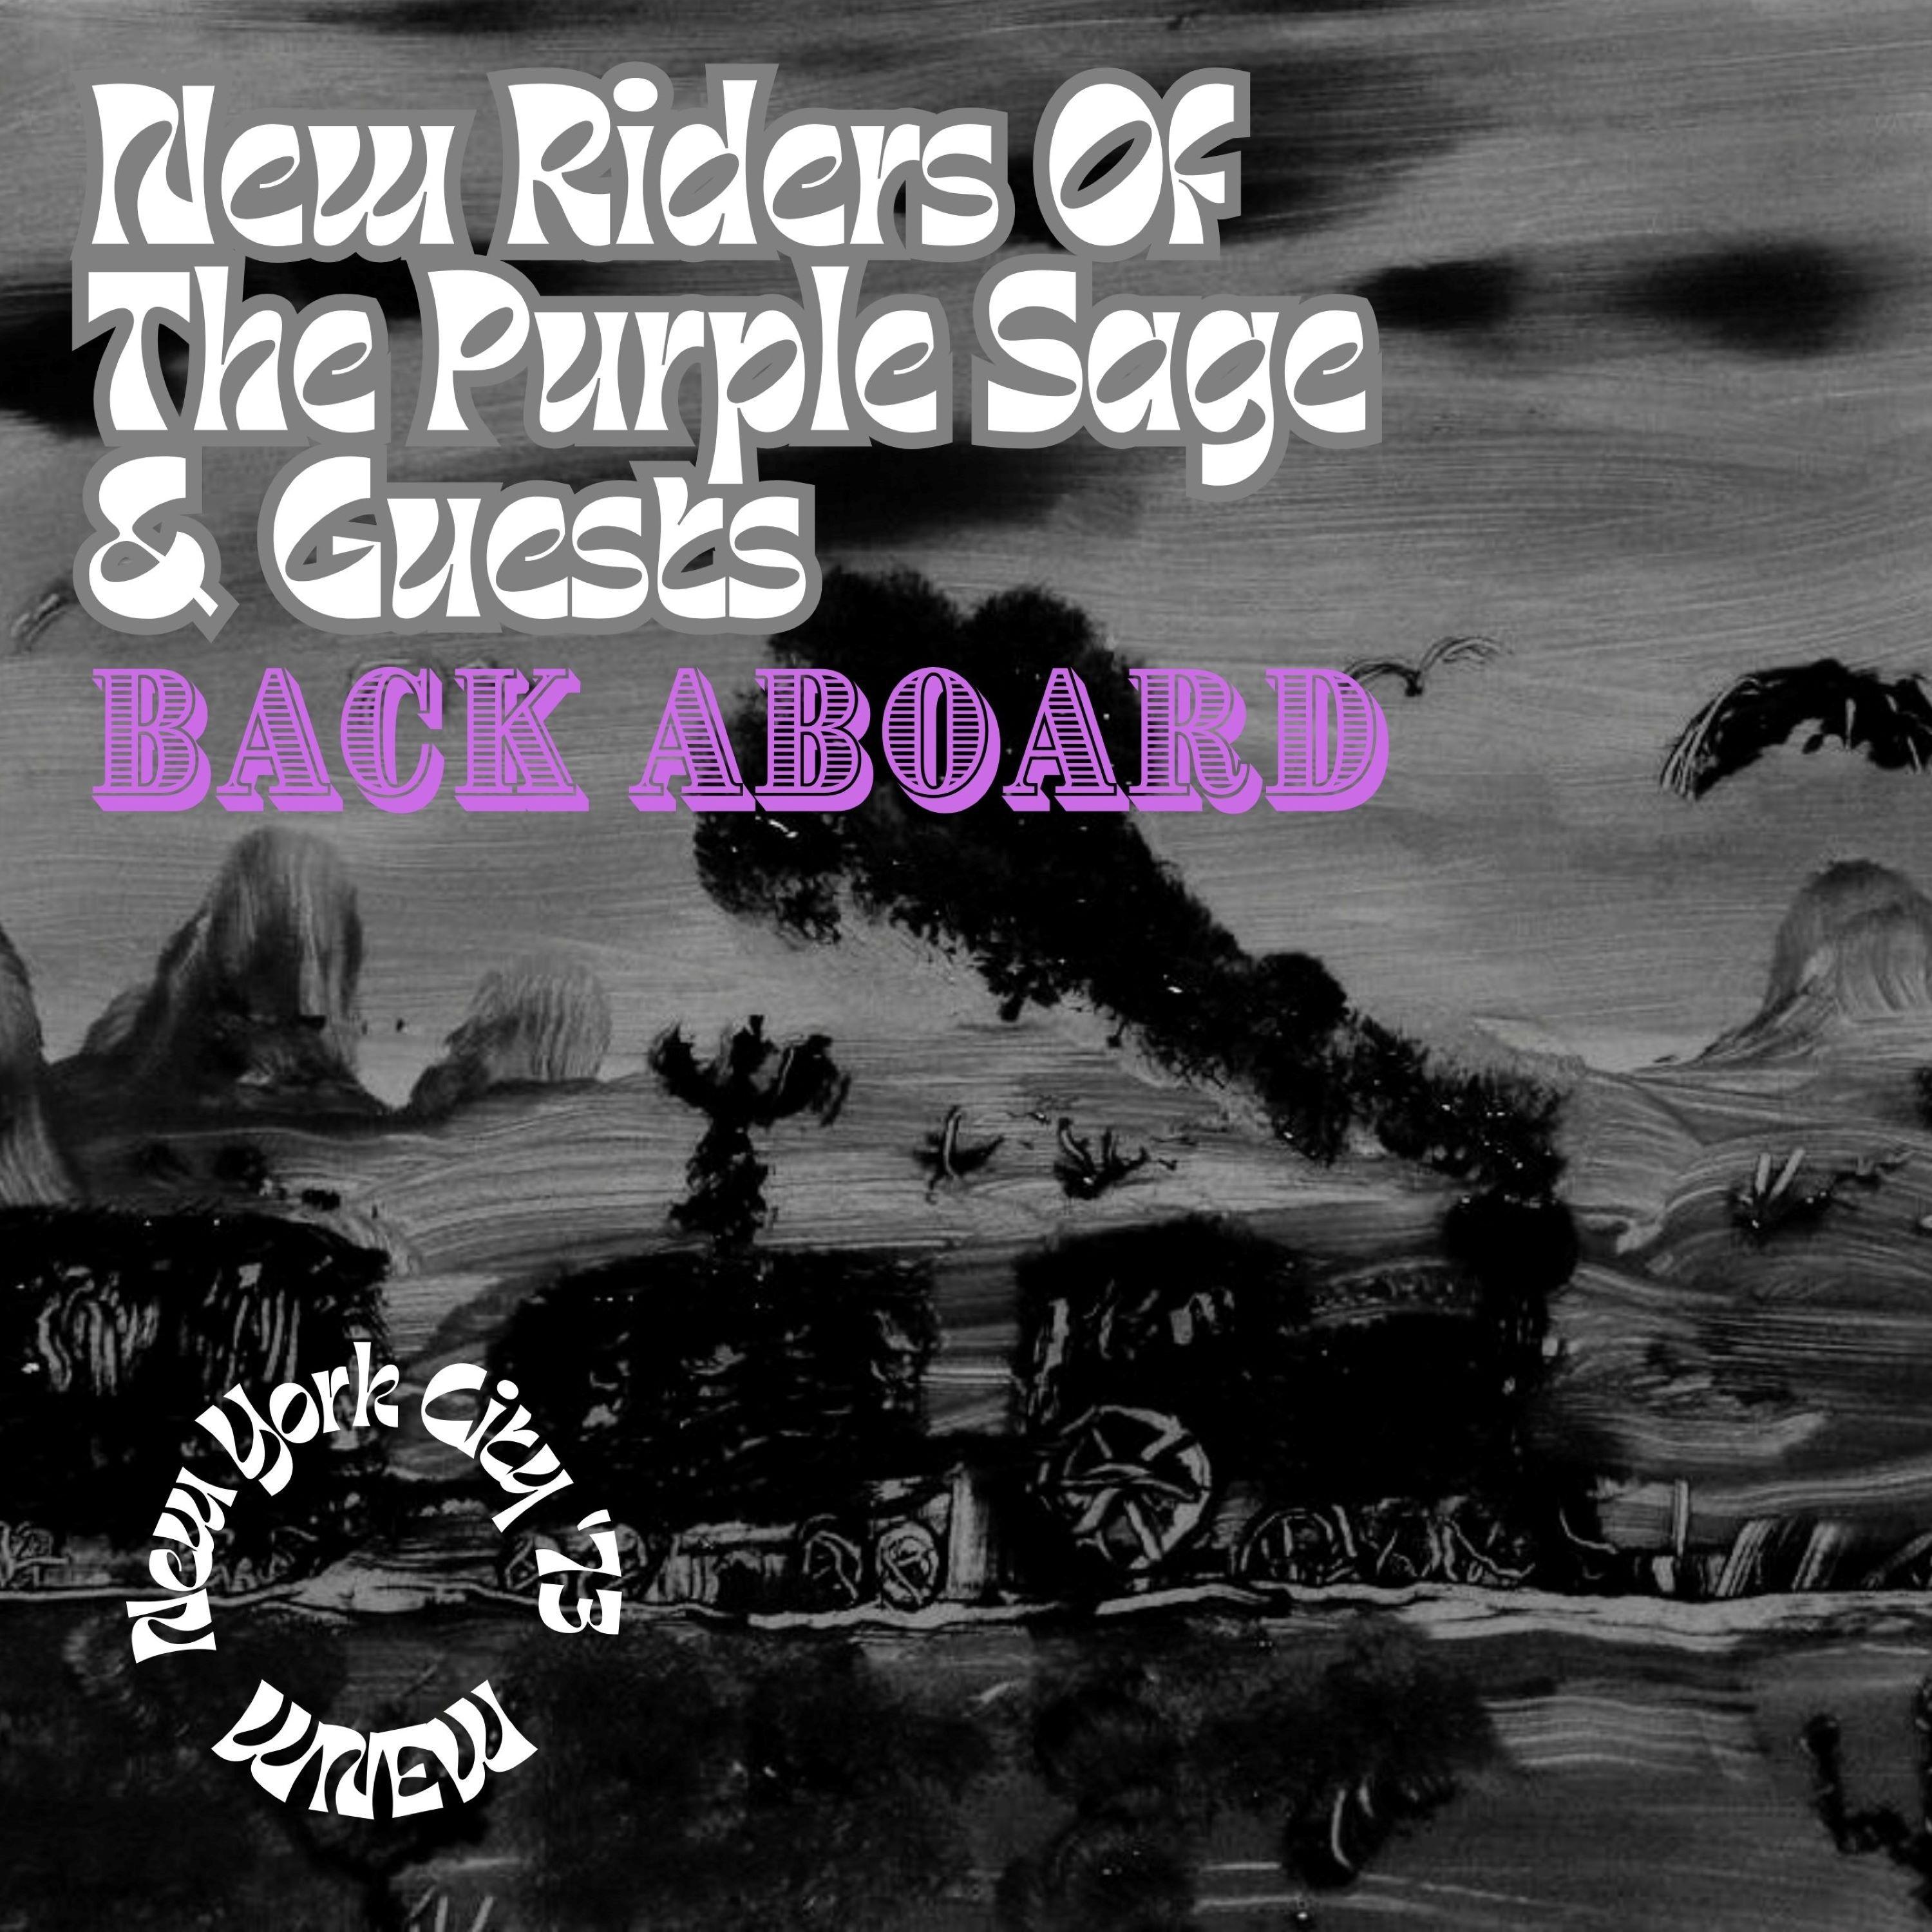 New Riders of the Purple Sage - Cold Jordan (Live)